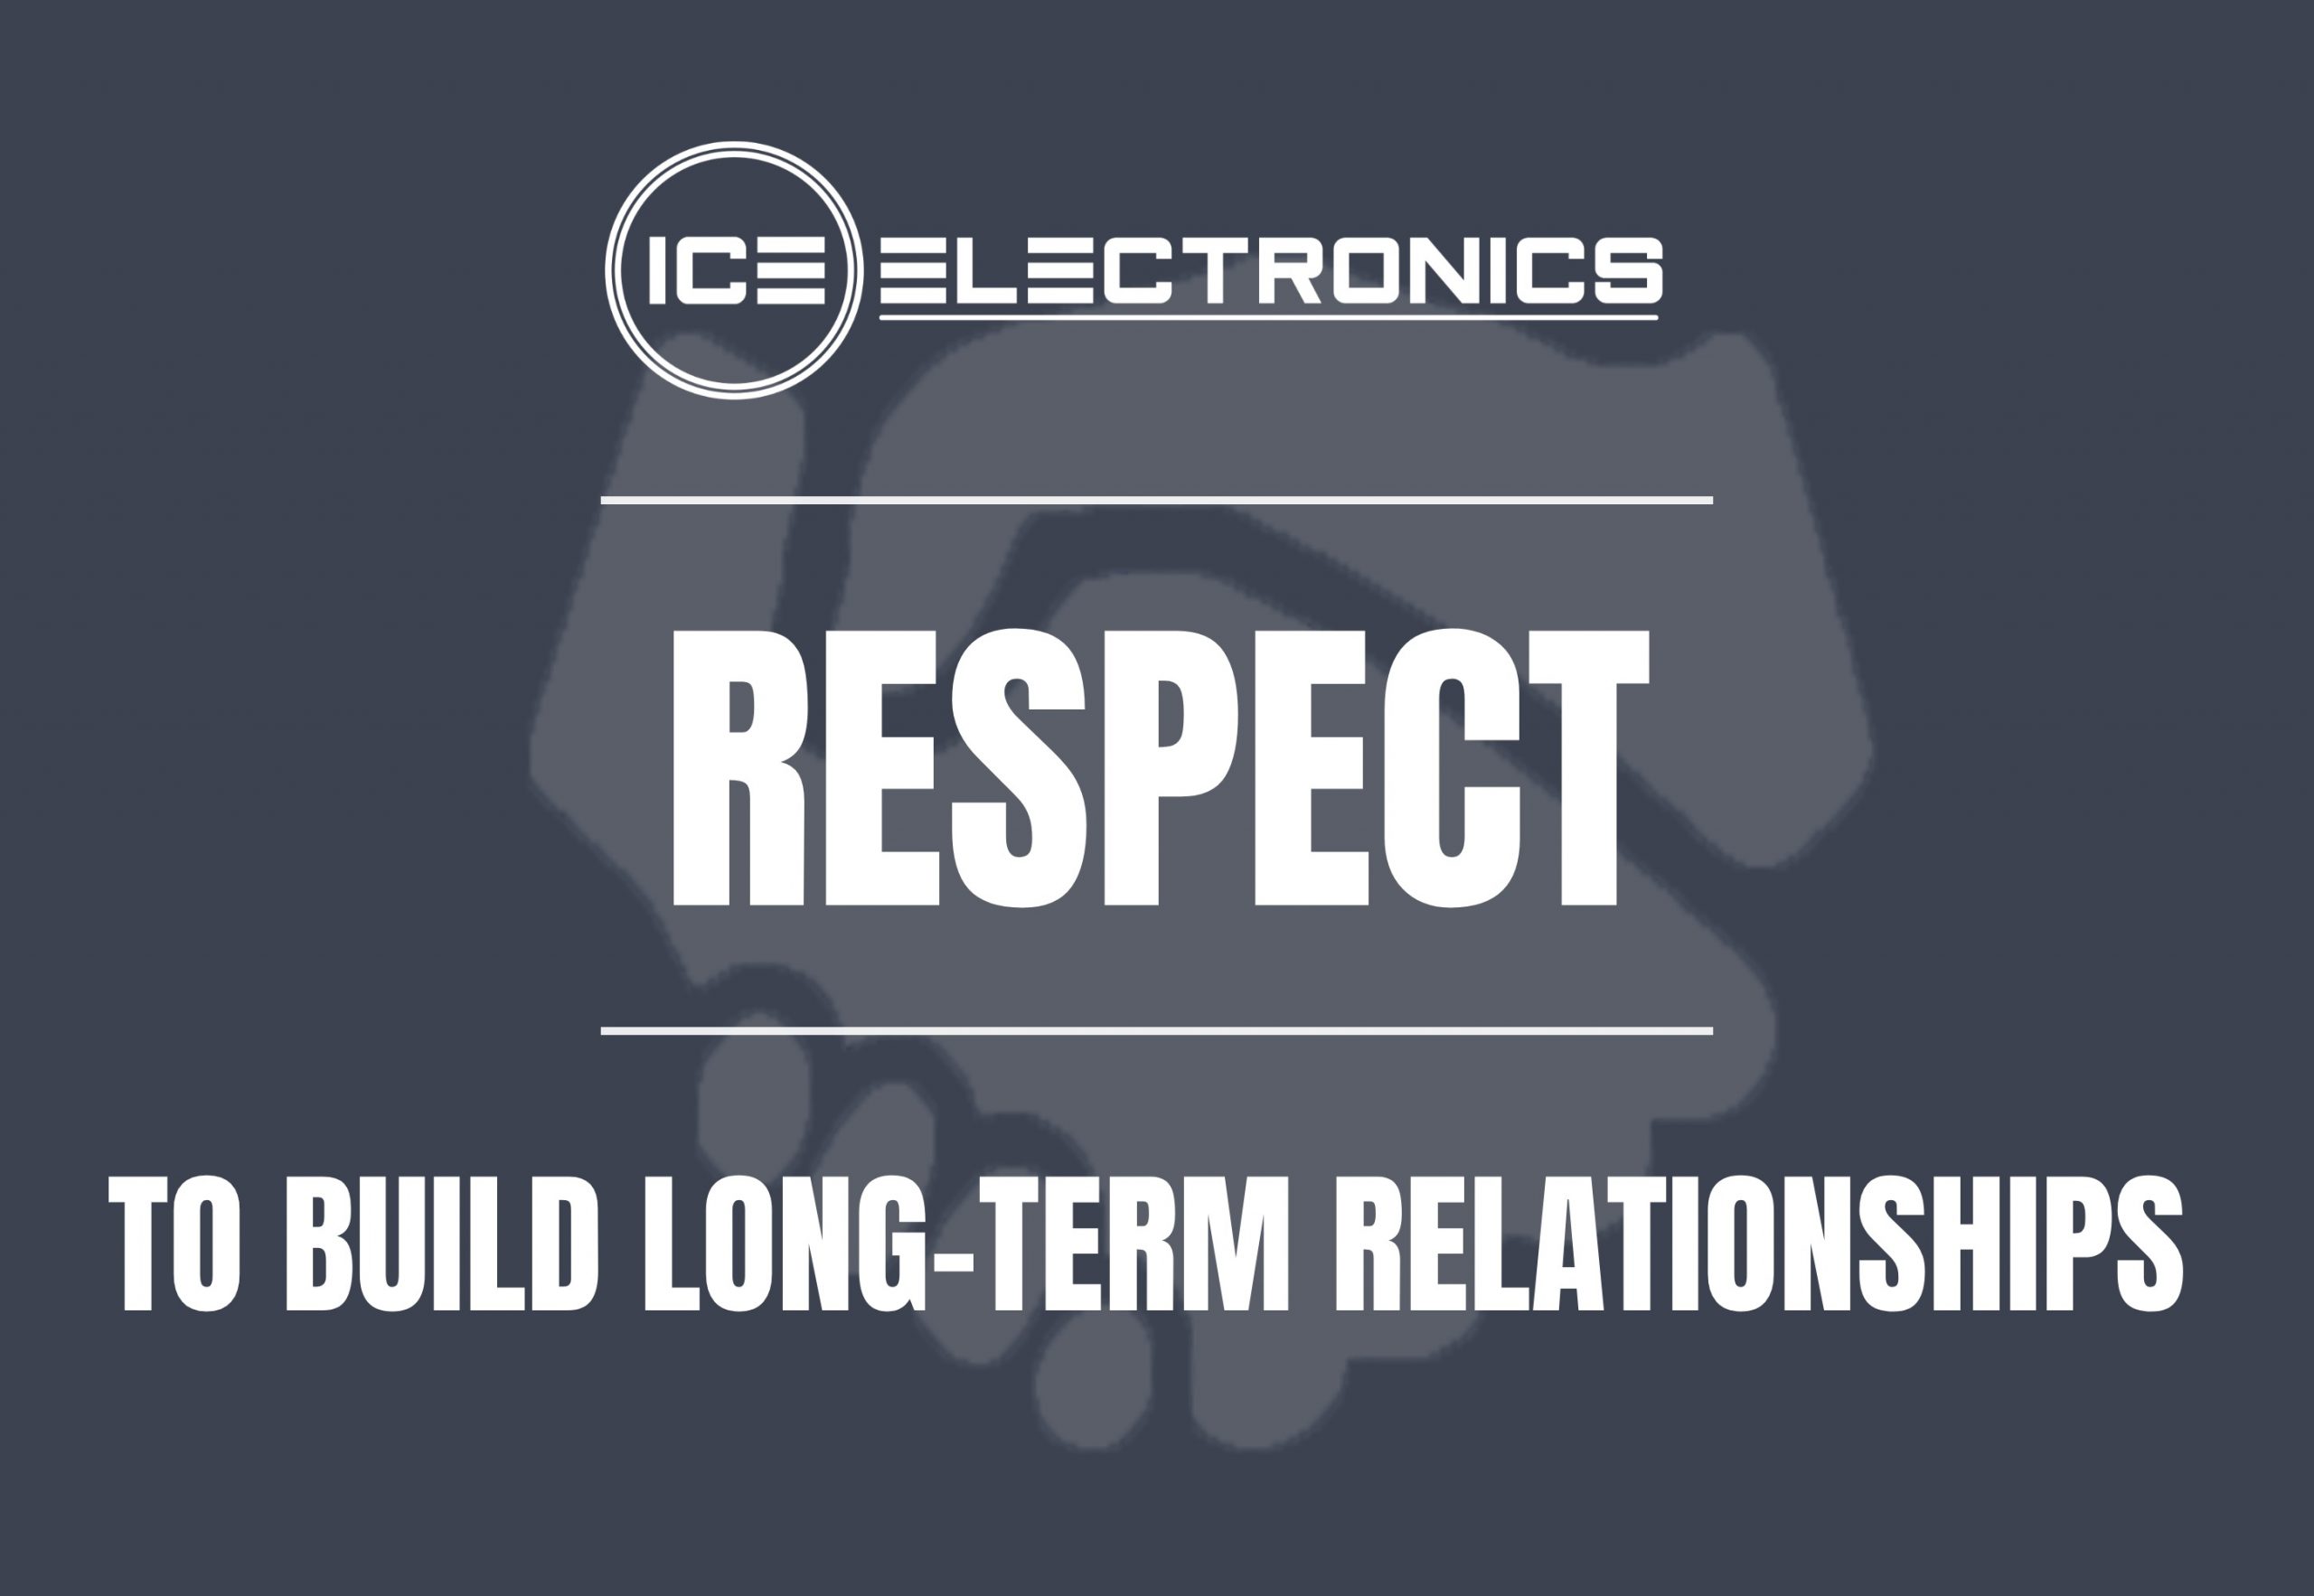 ICE Electronics - respect to build long-term relationships